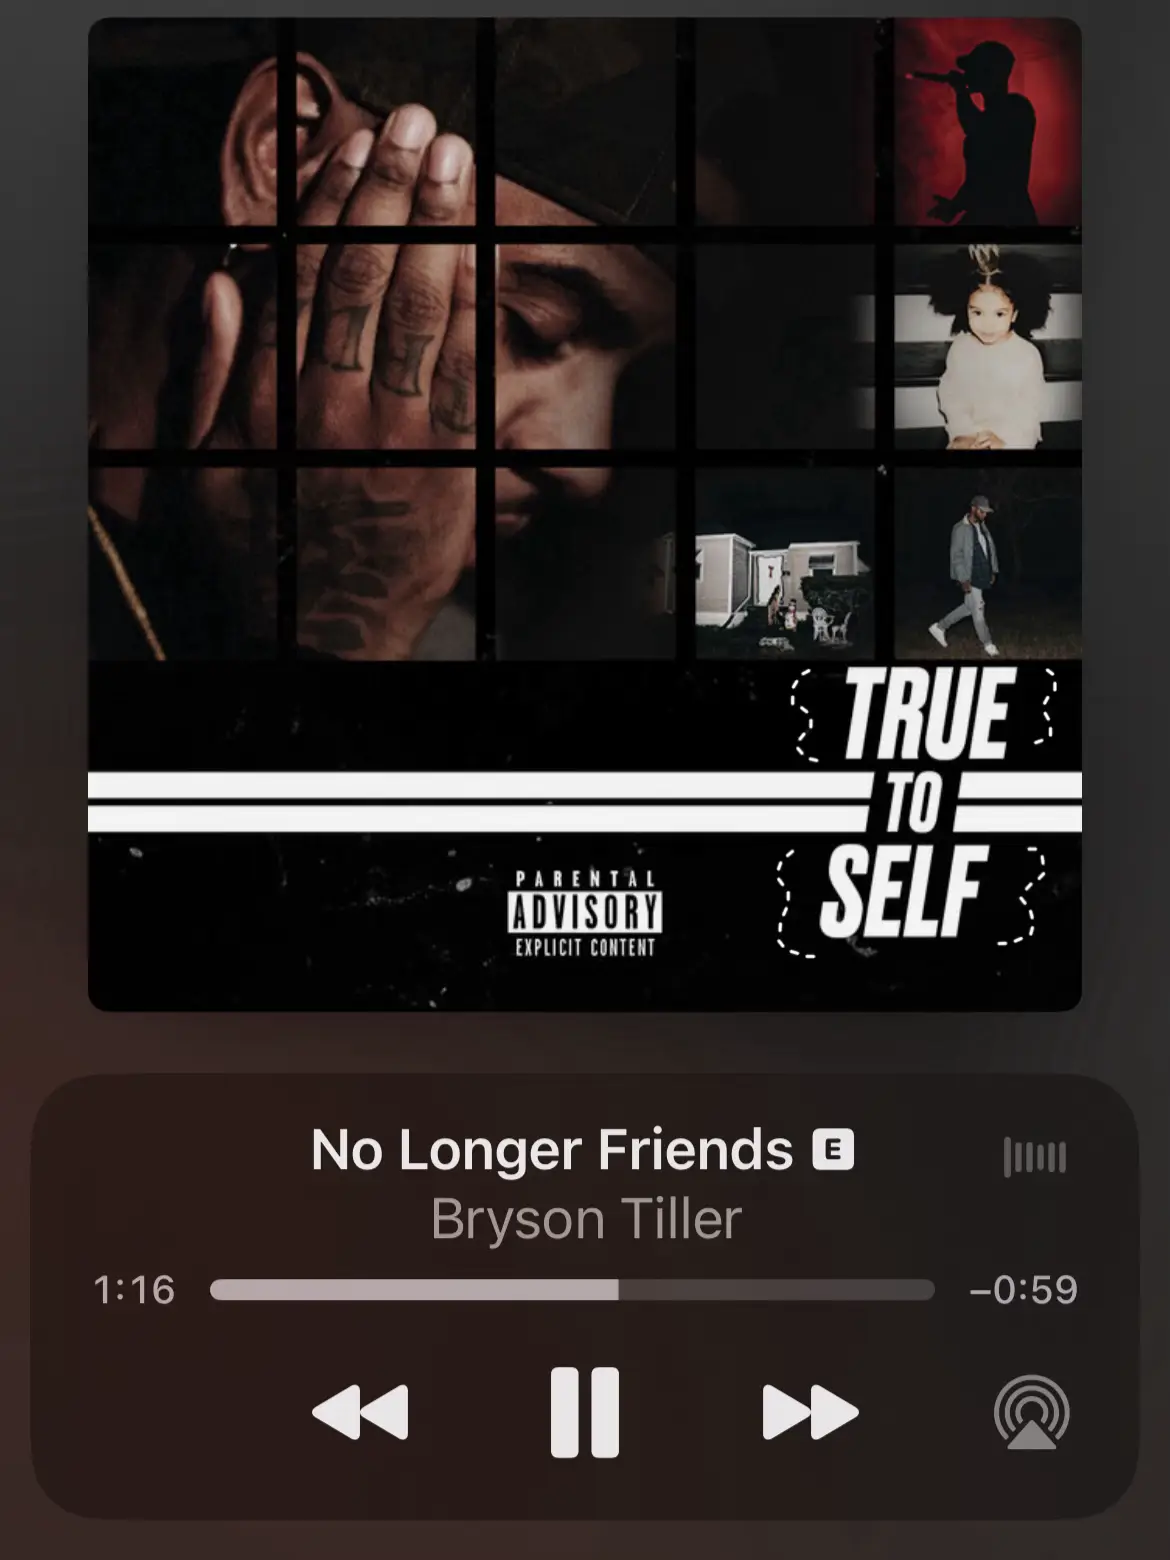  A song lyrics for the song "No Longer Friends" by Bryson Tiller.